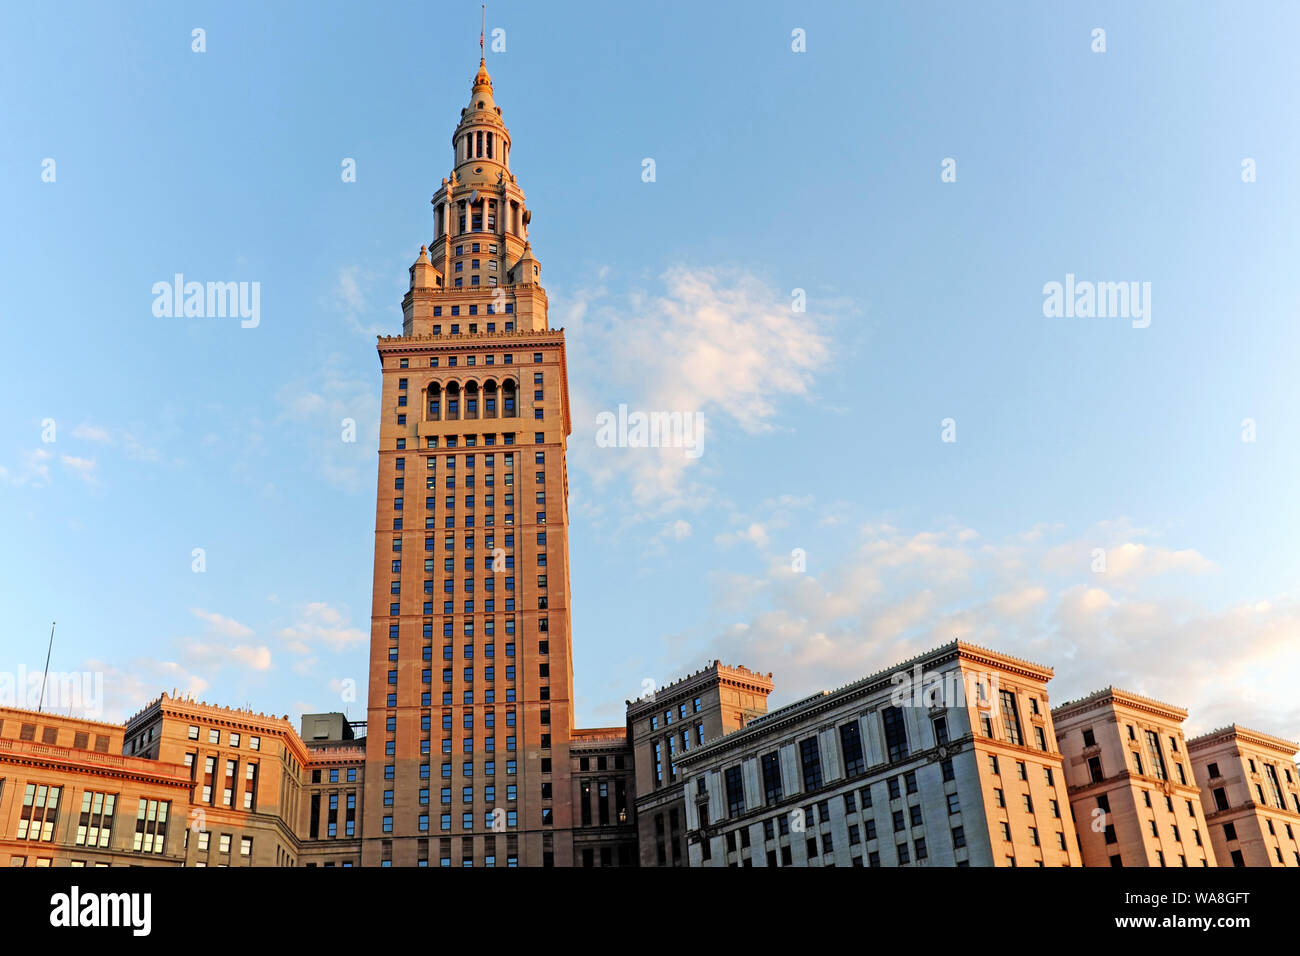 The Cleveland Ohio iconic landmark building, the Terminal Tower, glistens in the sunset over downtown Cleveland, Ohio, USA. Stock Photo